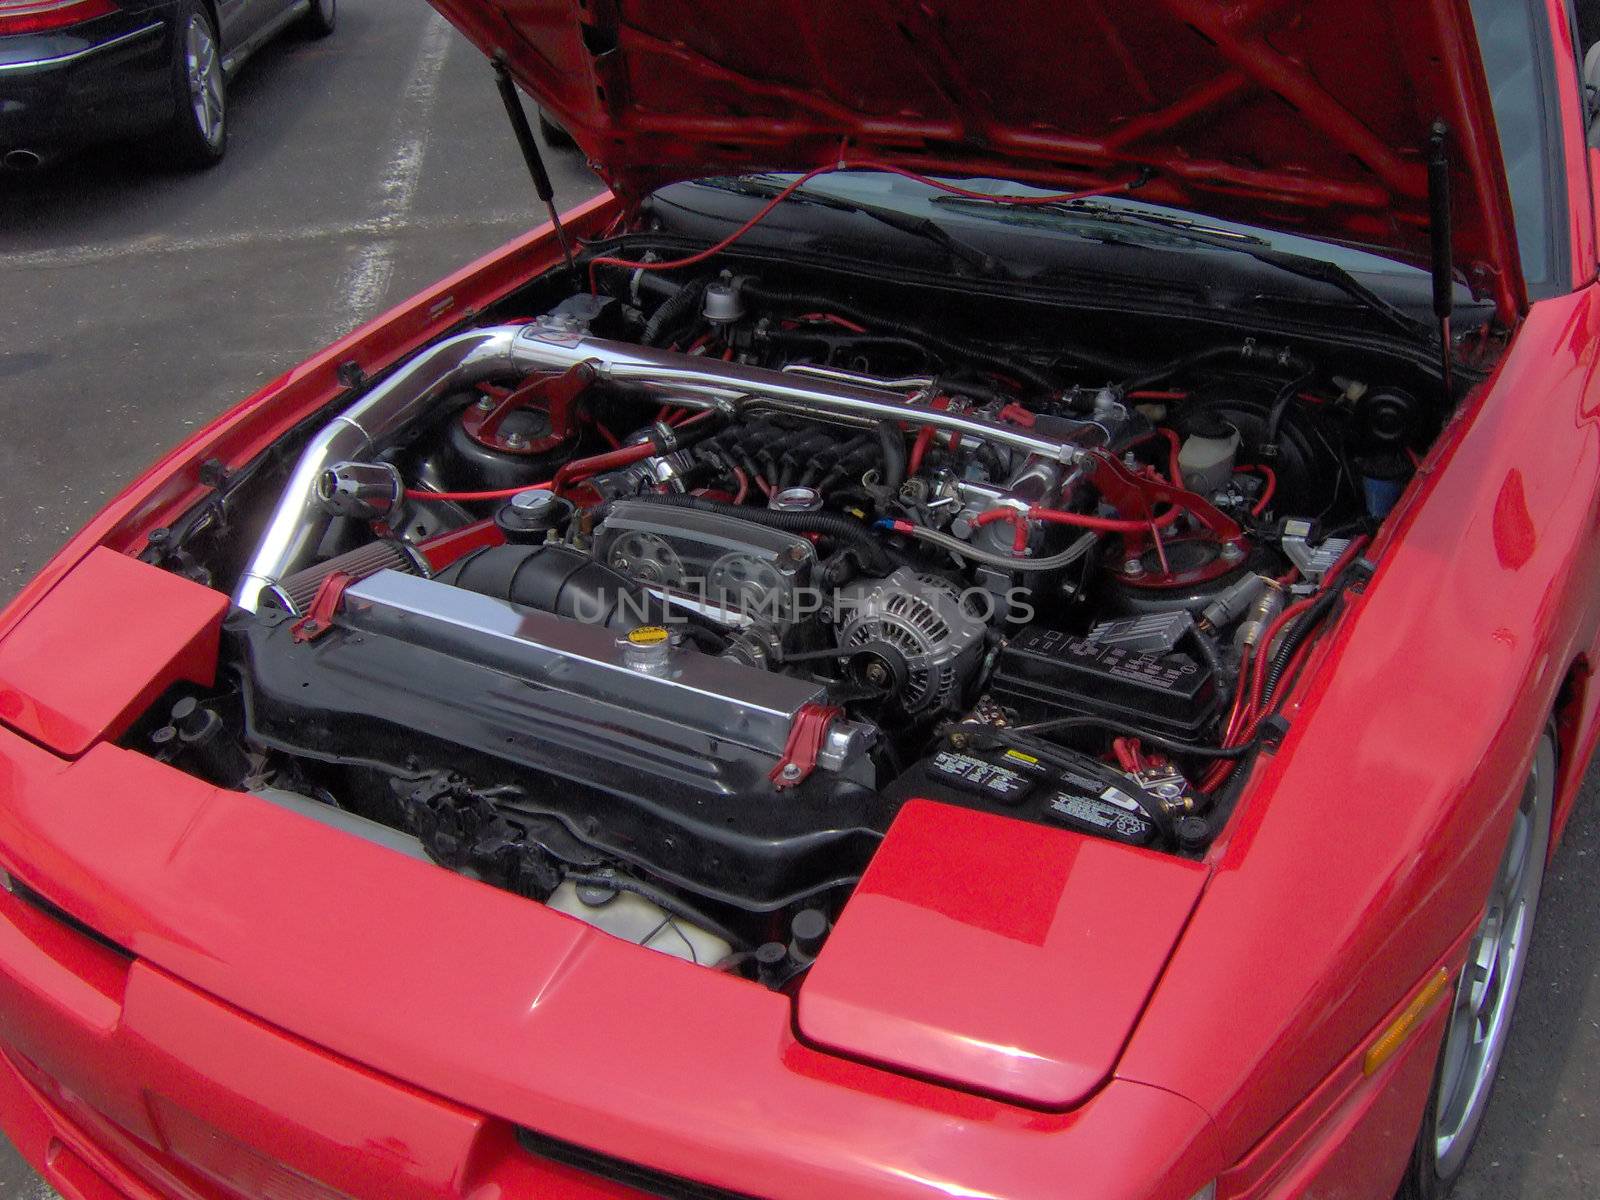 A red turbo sports car with a lot of work done to it under the hood.  